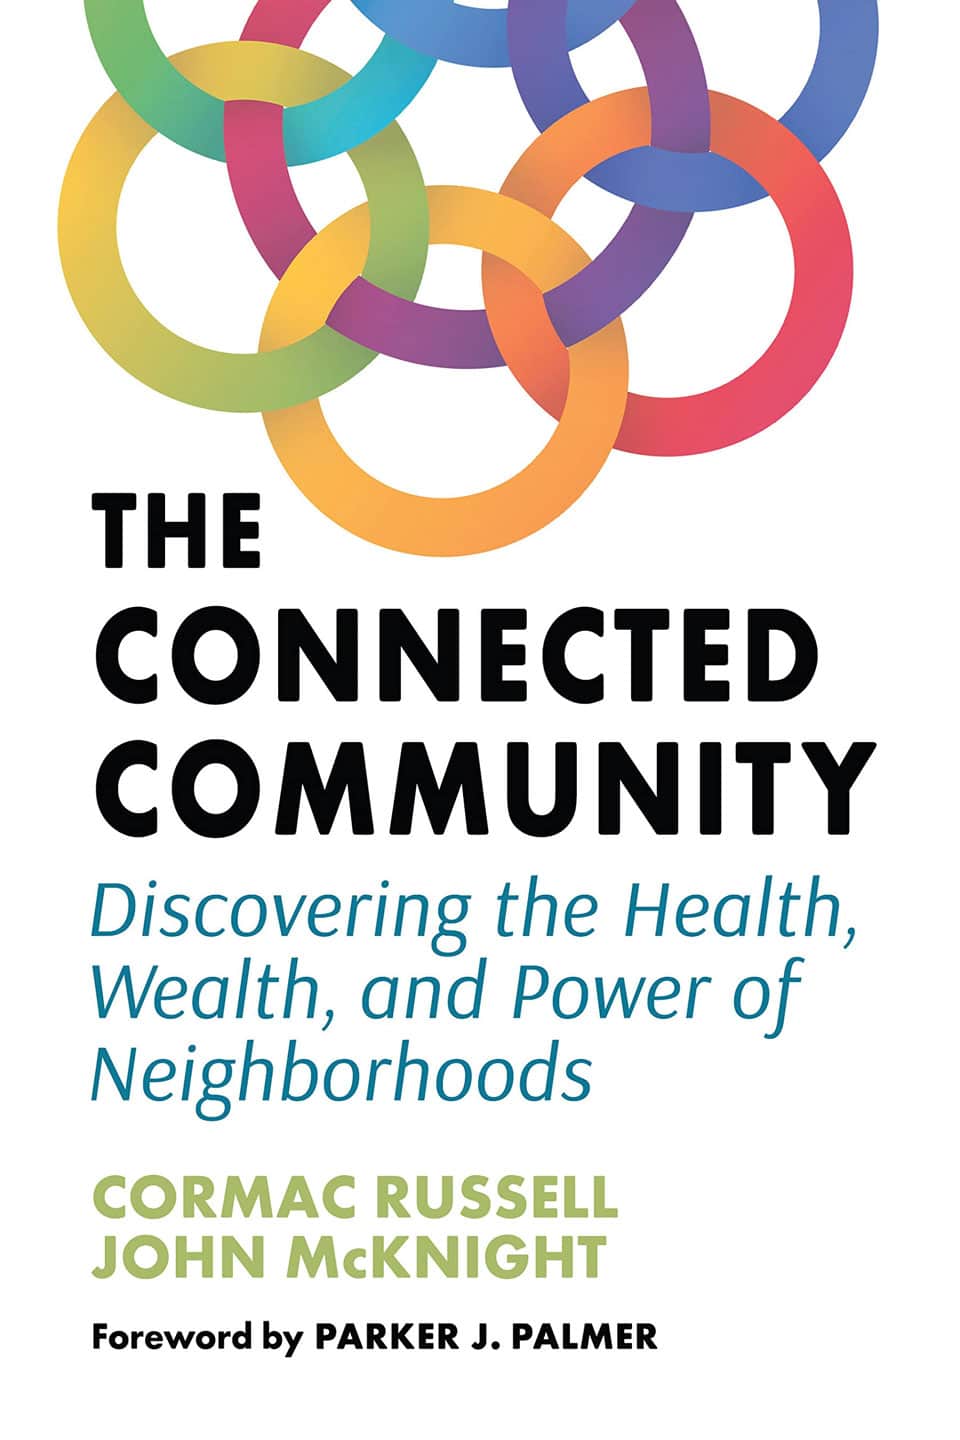 The Connected Community: Discovering the Health, Wealth, and Power of Neighborhoods by Cormac Russell and John McKnight